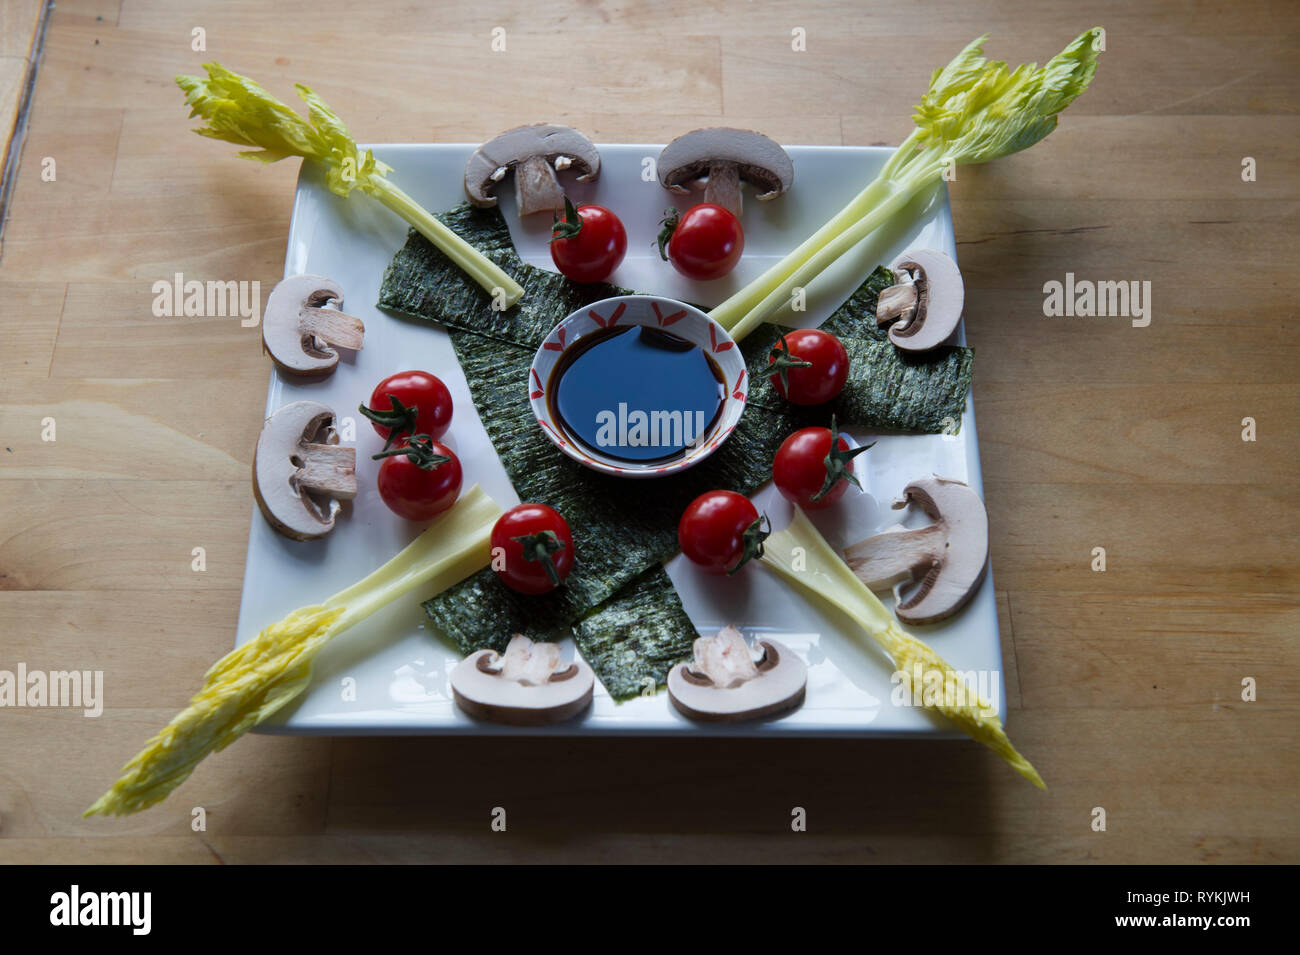 Umami ingredients displayed on plate including celery, mushrooms, miso, soy sauce -an ideal vegan meal high in glutamate, nutritious and flavoursome. Stock Photo